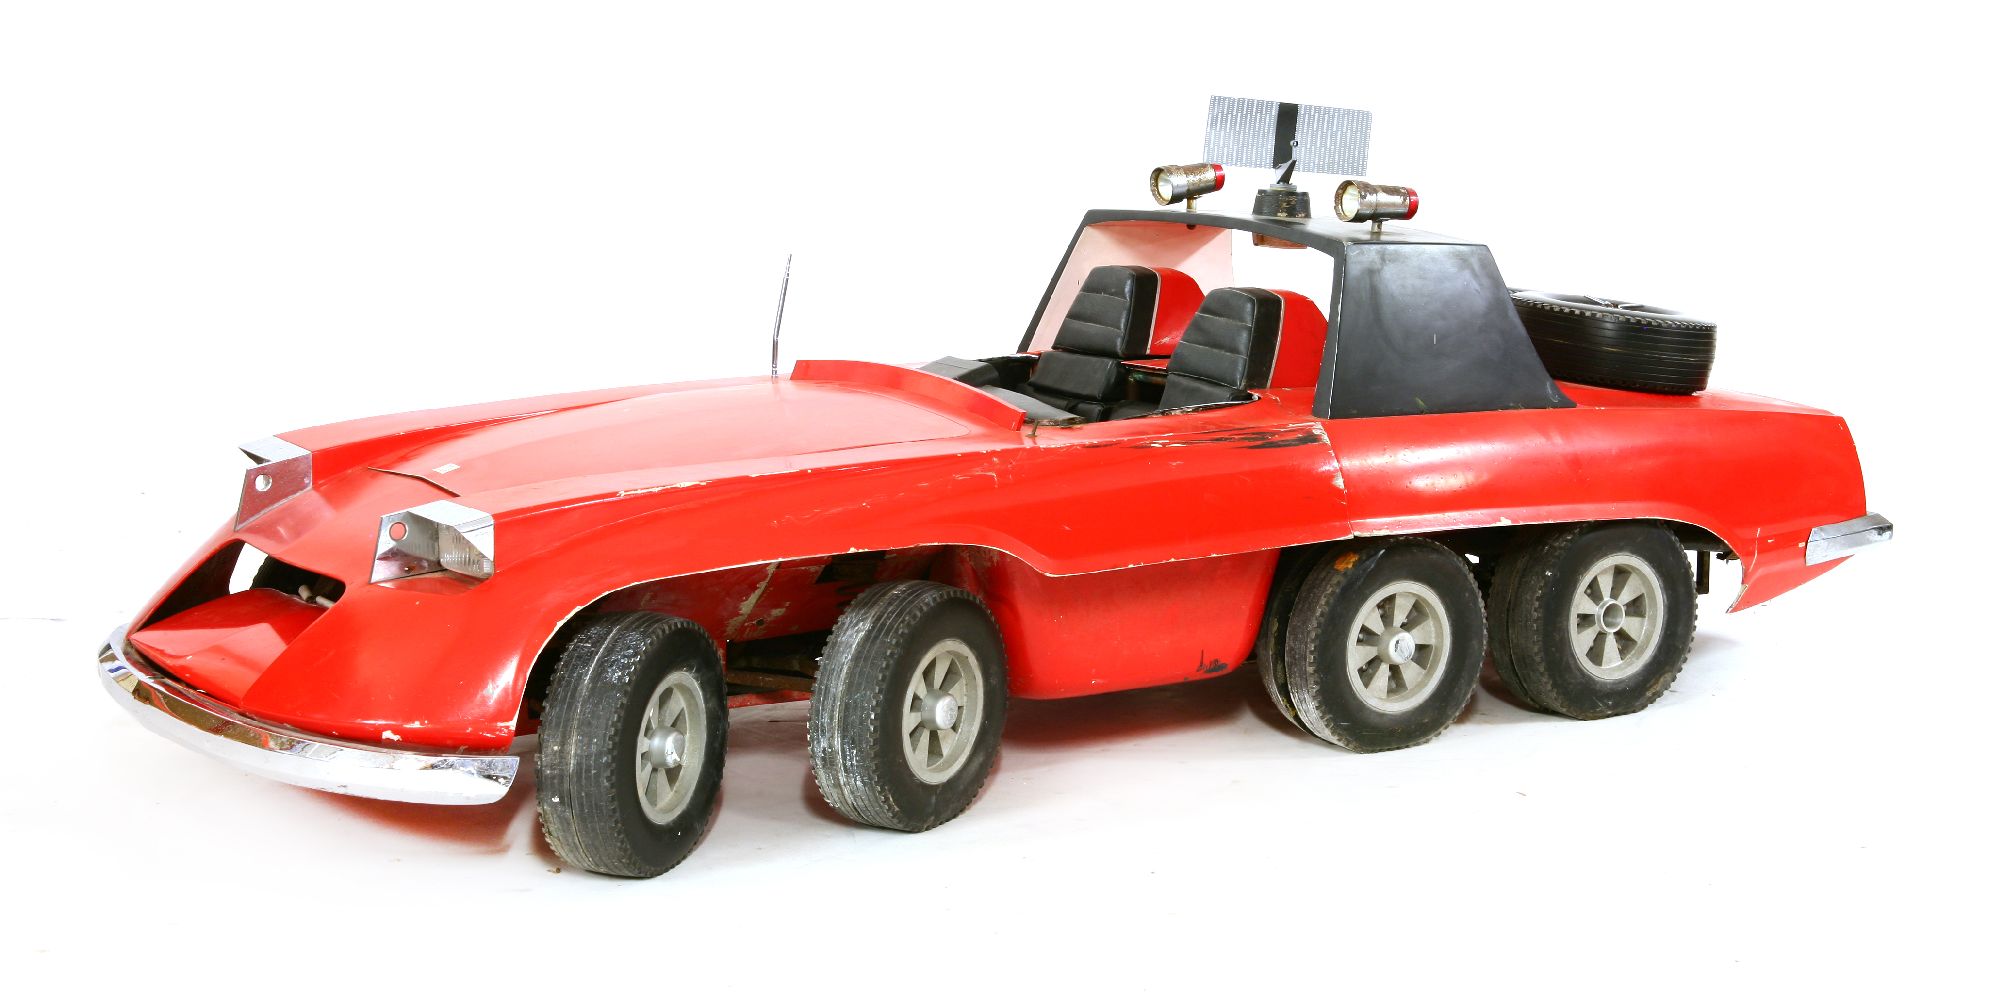 An original film prop for the ‘The Investigator’ a six-wheeled car, designed by Reg Hill for Gerry